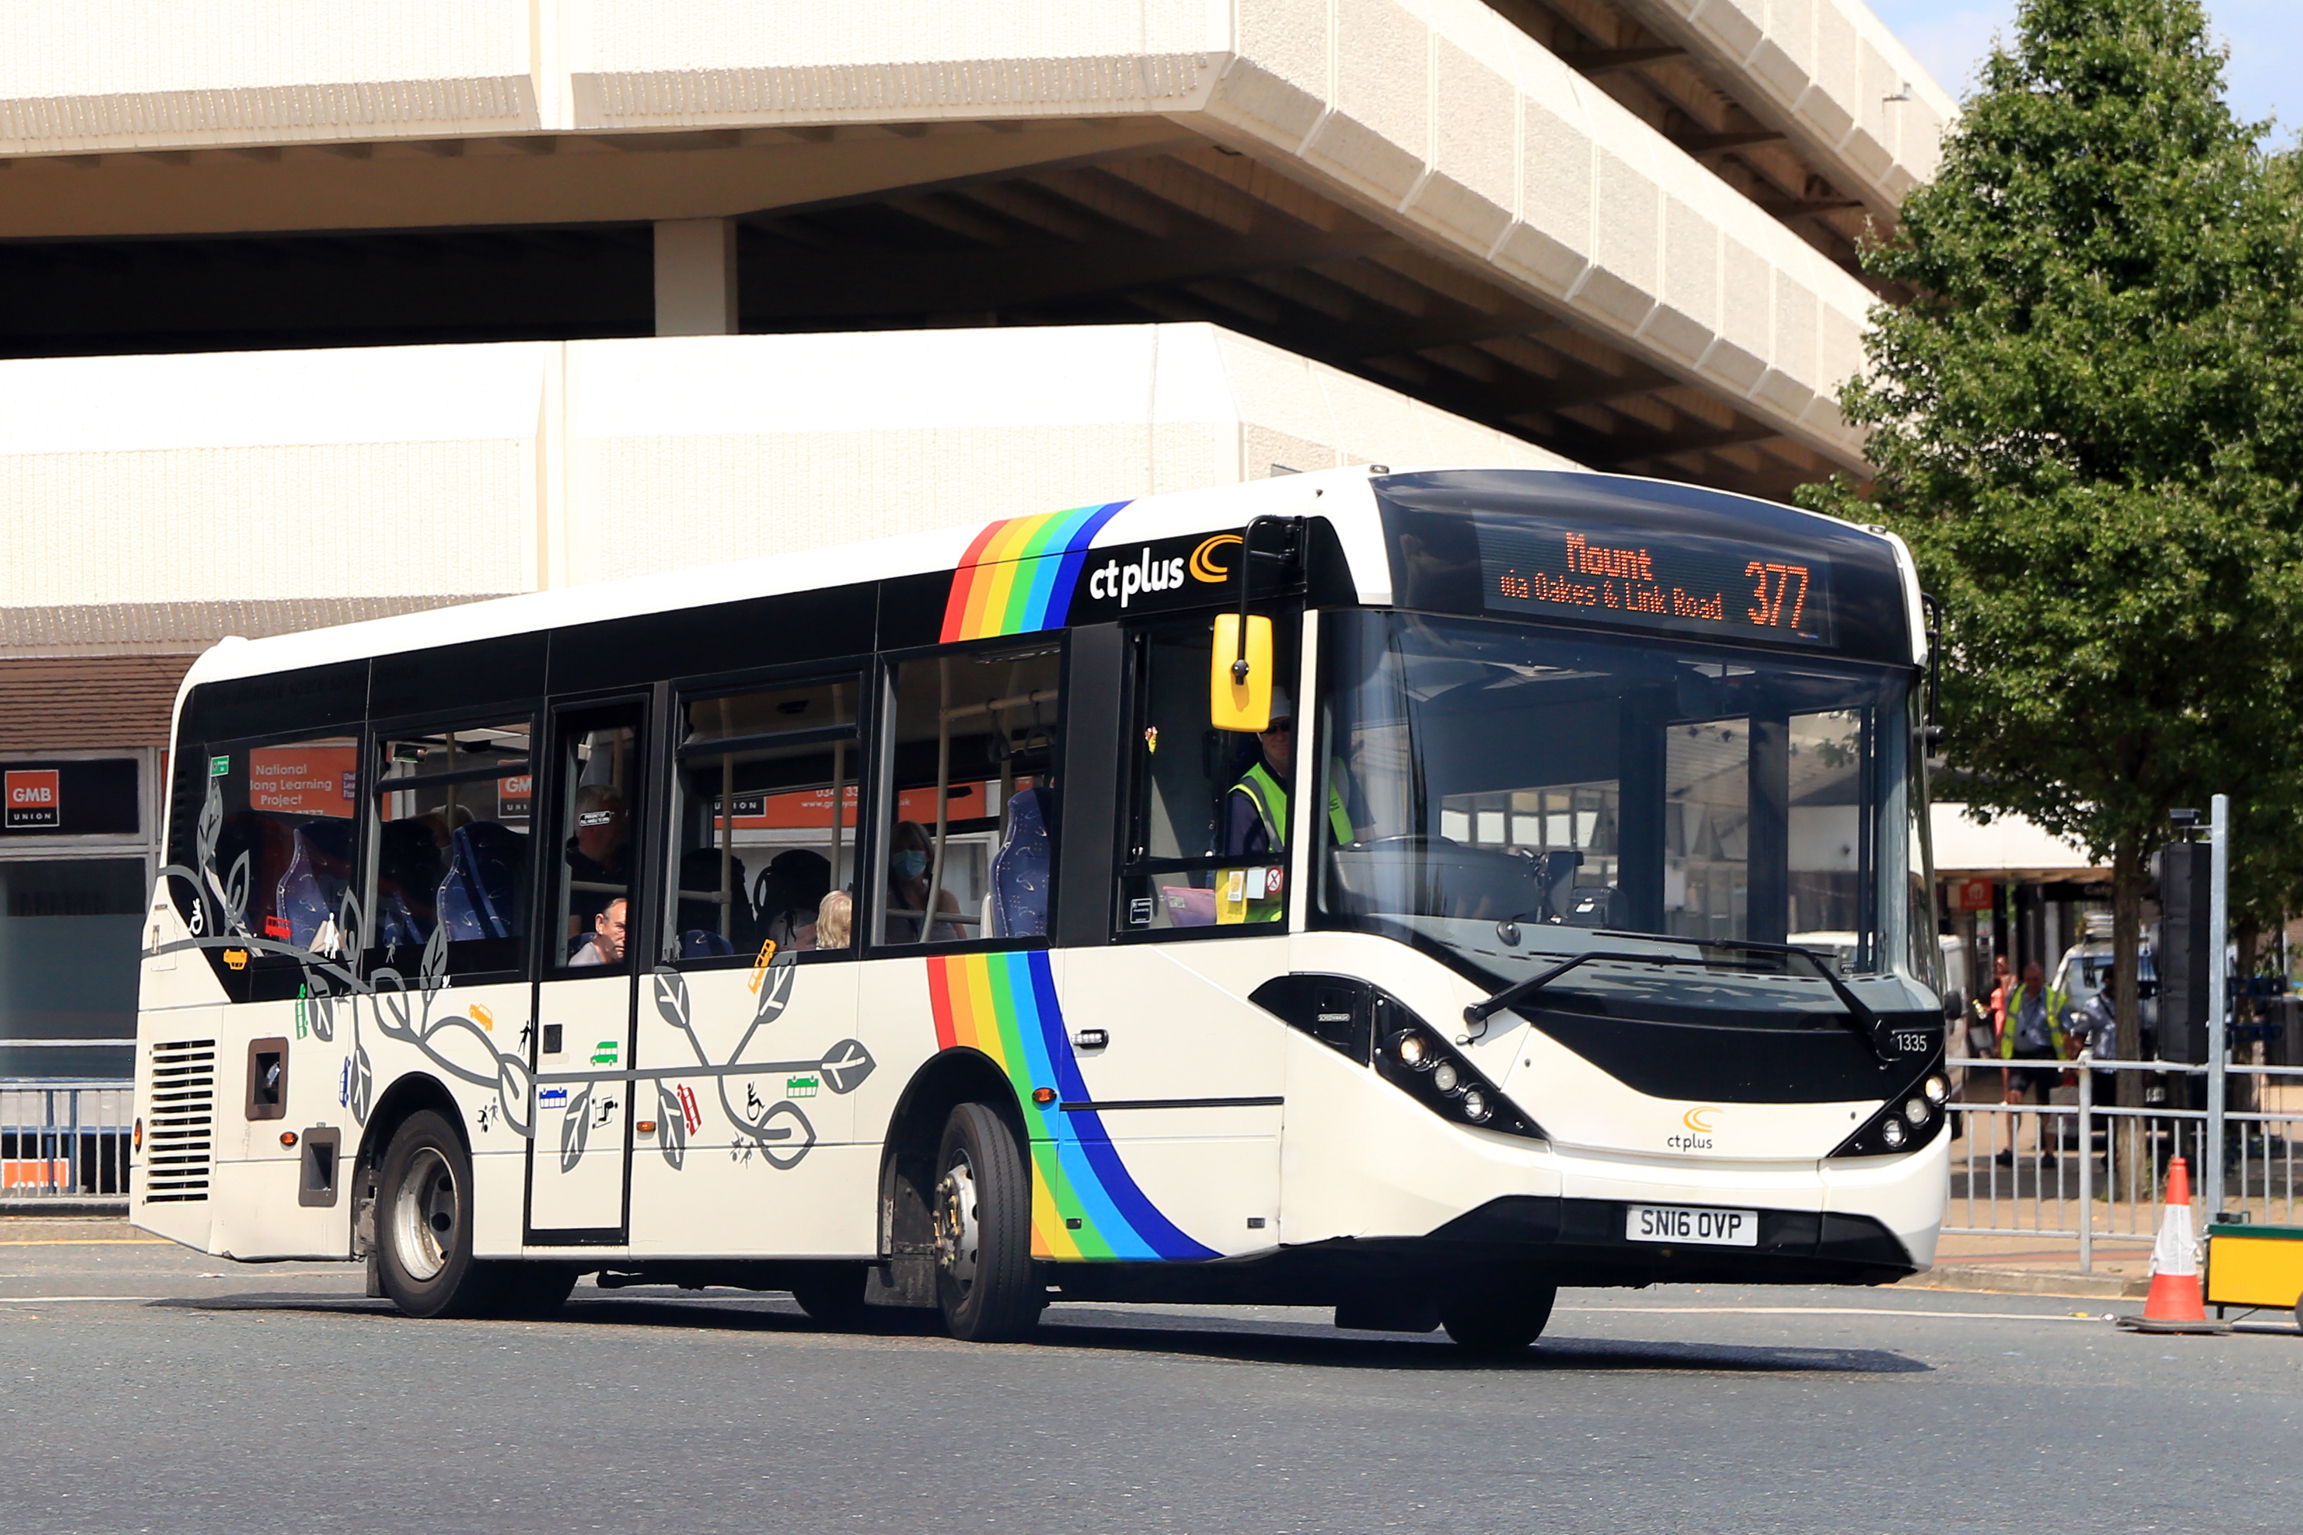 HCT looks to transfer all Yorkshire services